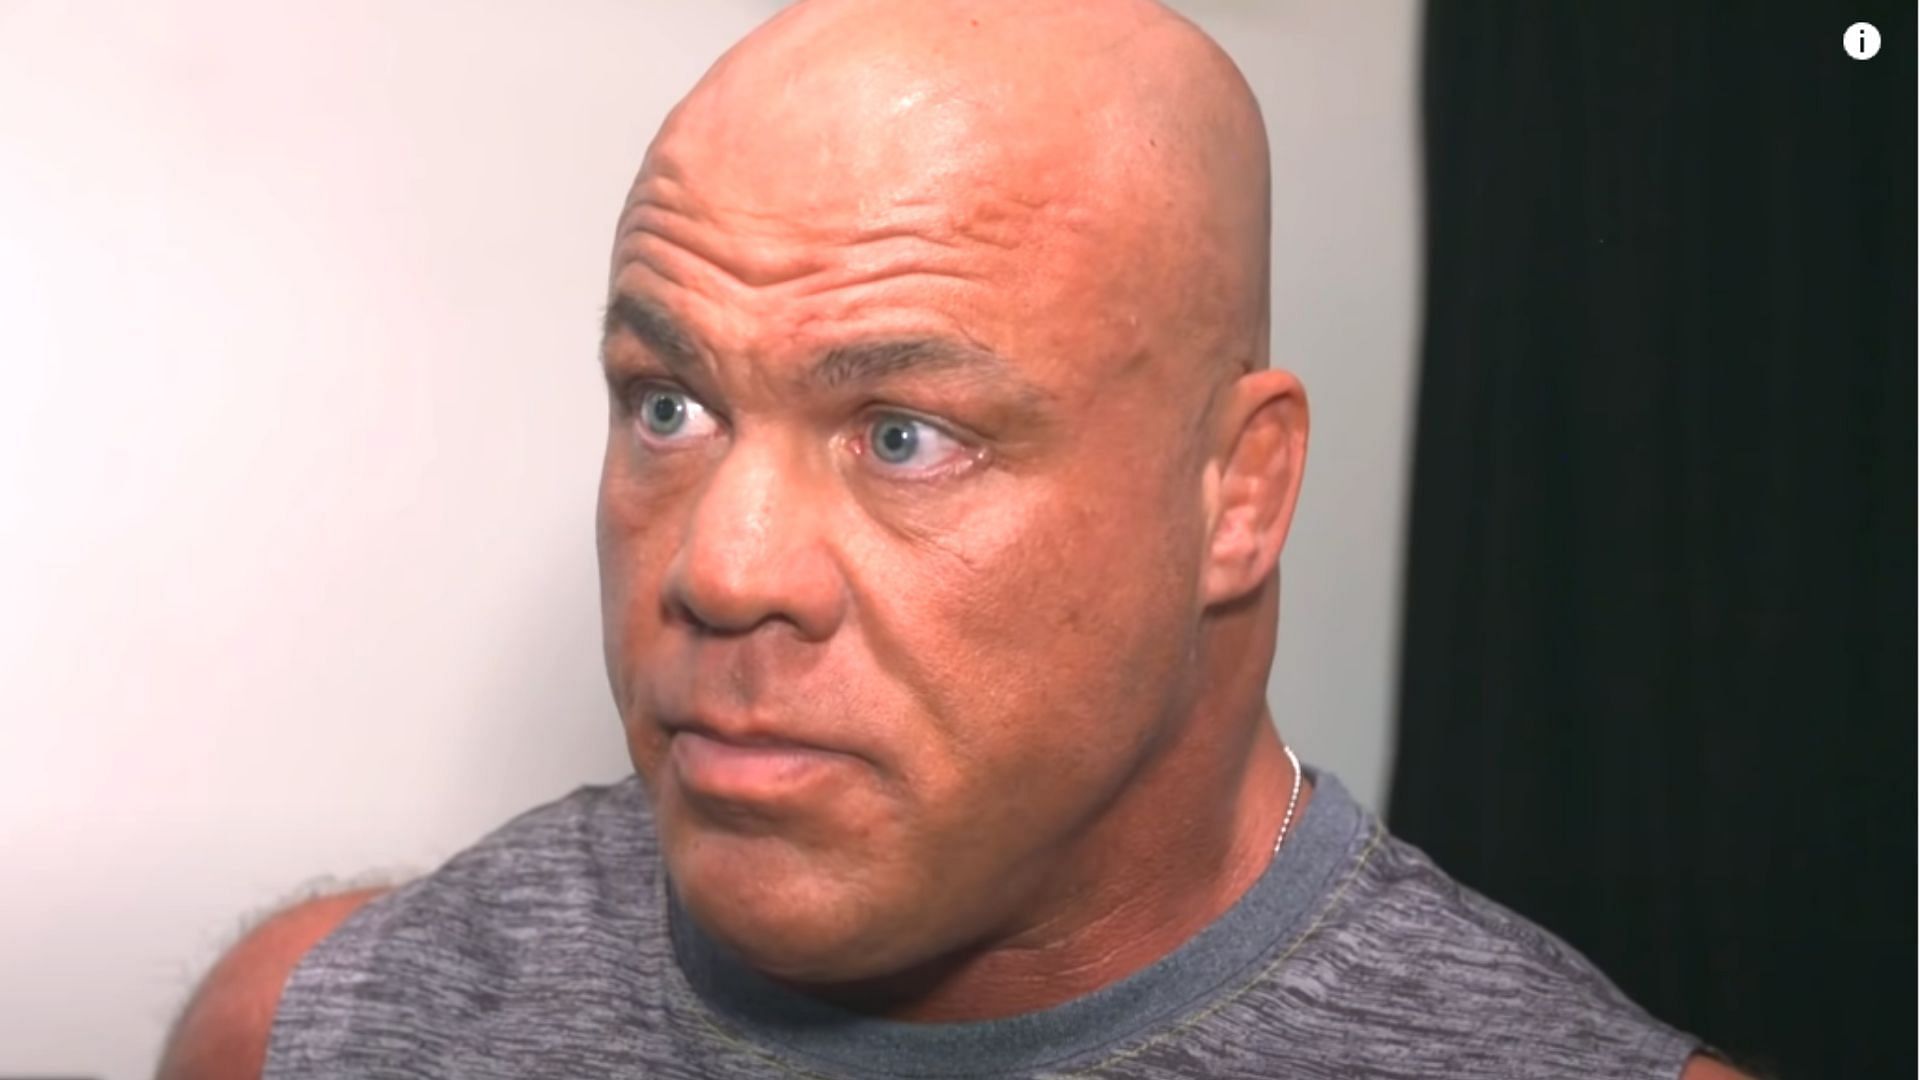 Kurt Angle reacted to a report that he accidentally hurt one of his former opponents.